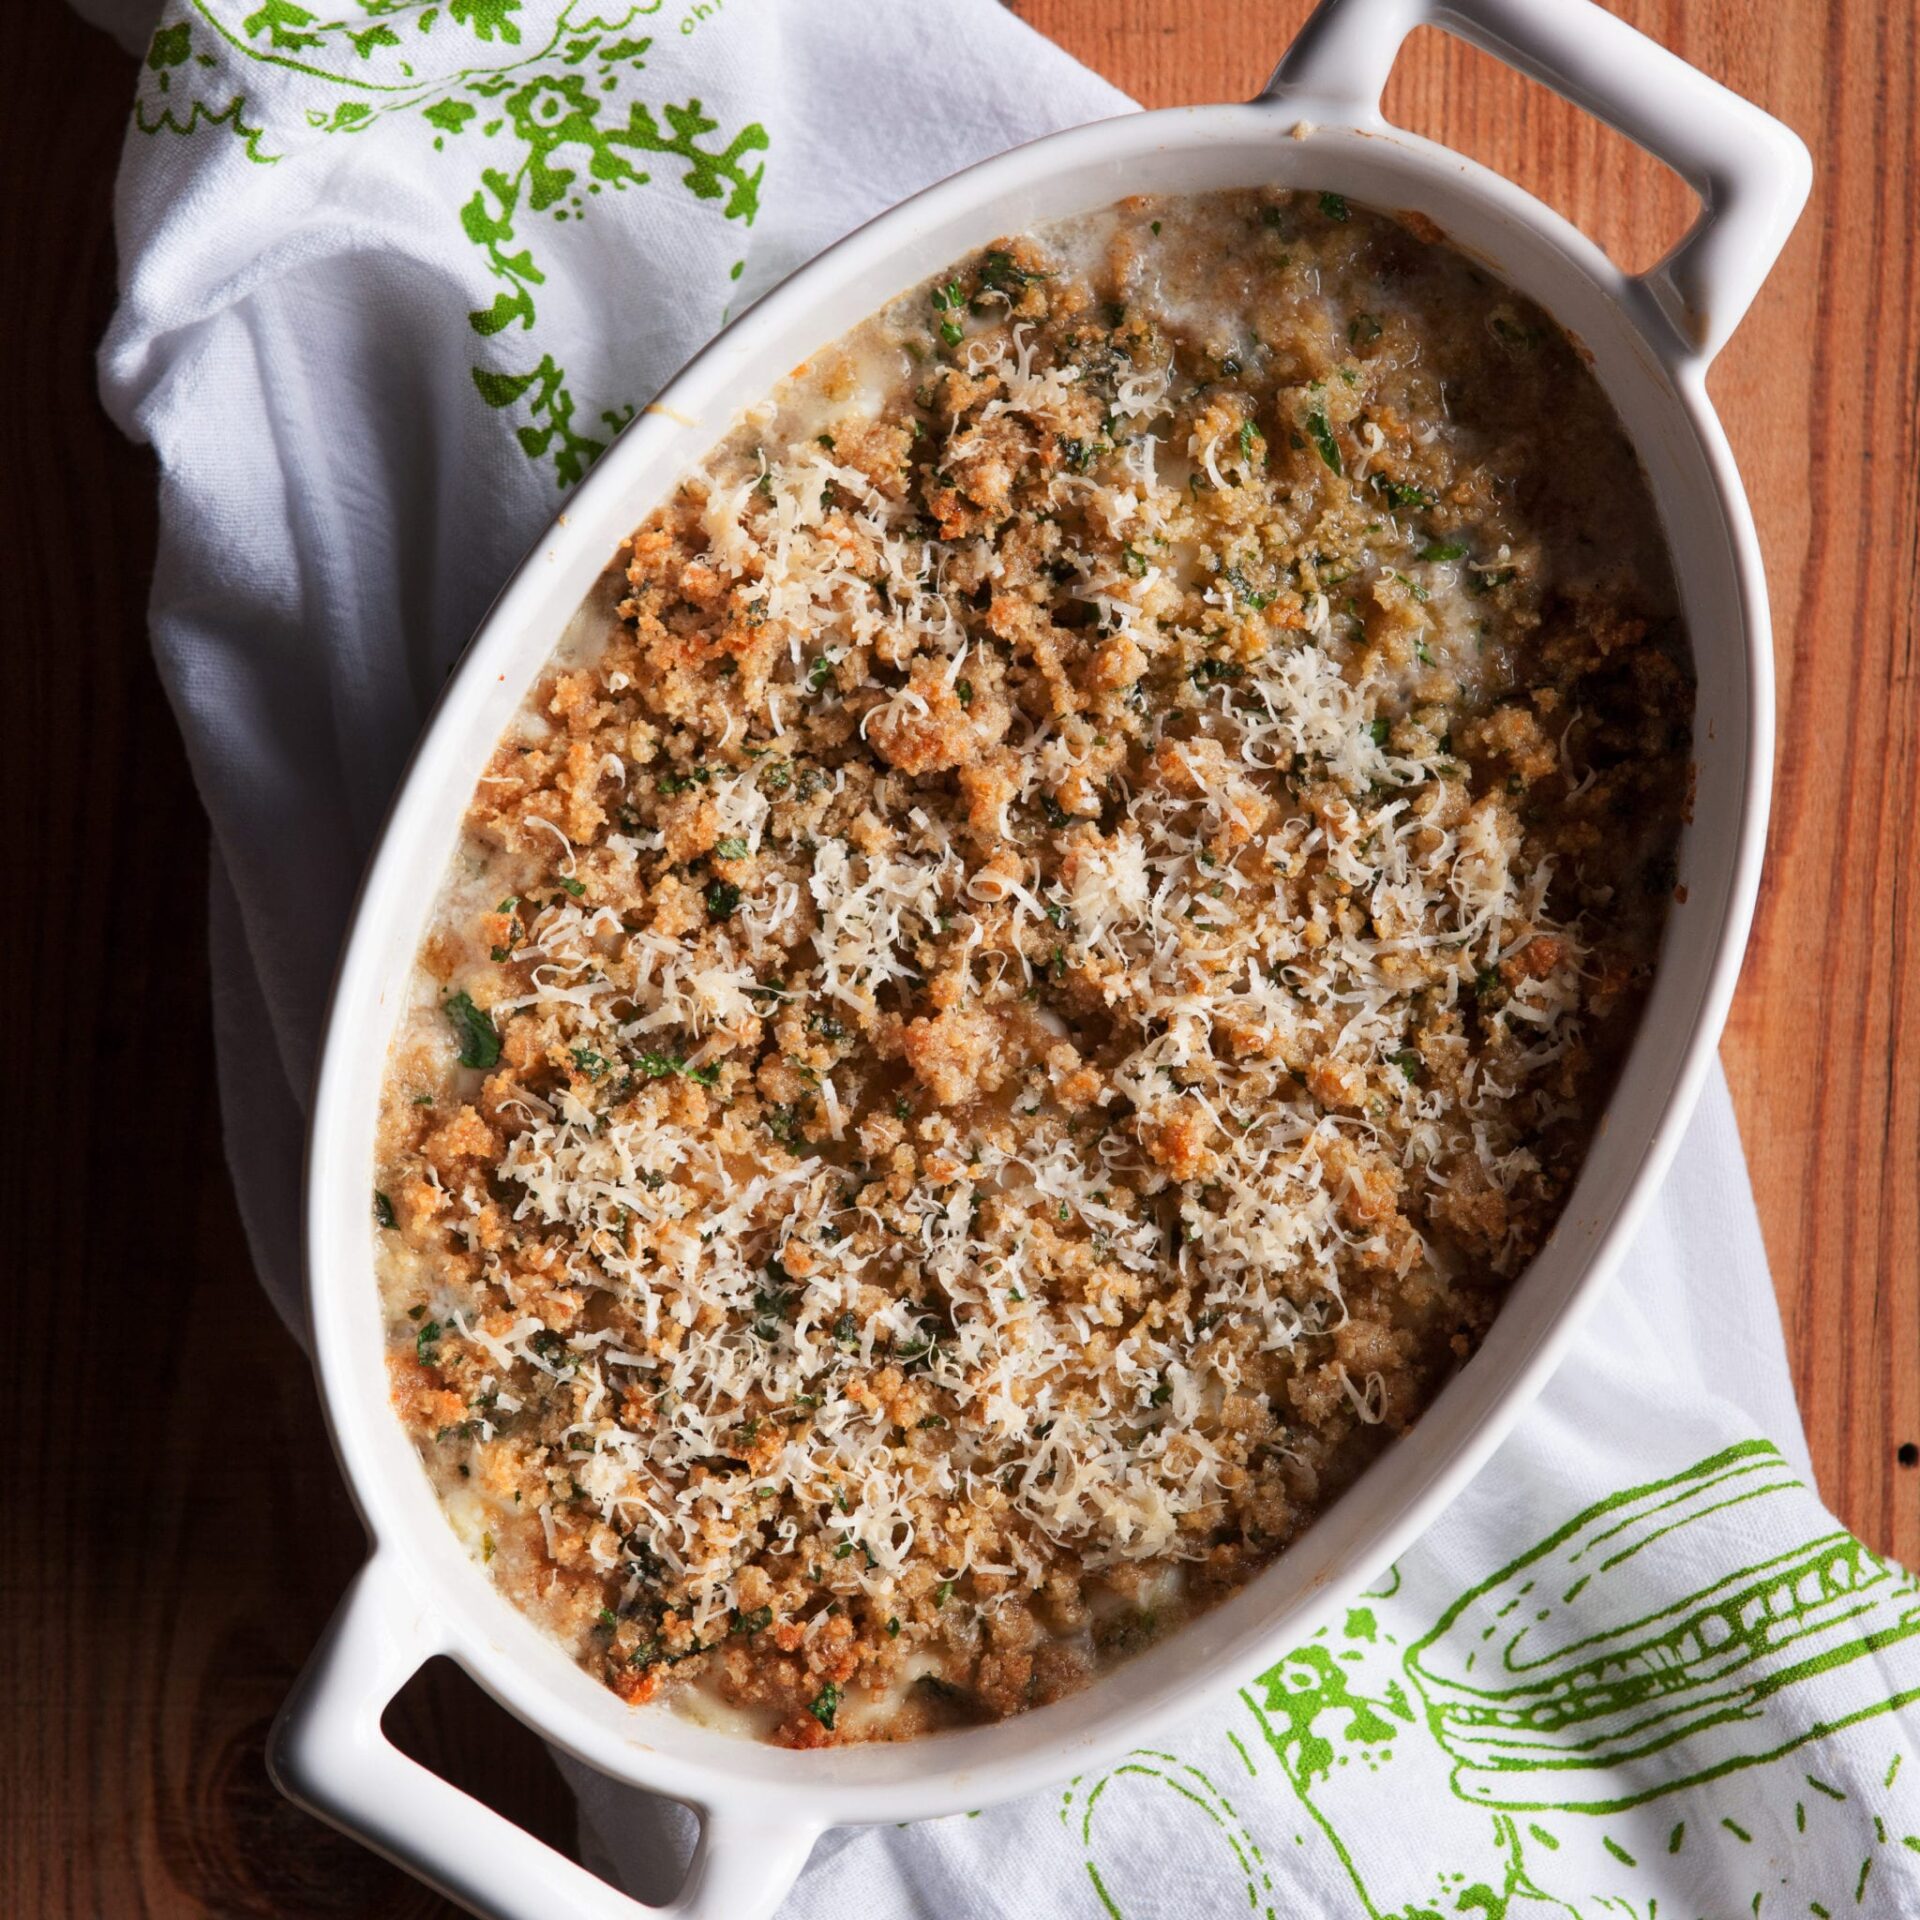 Oyster-stuffing